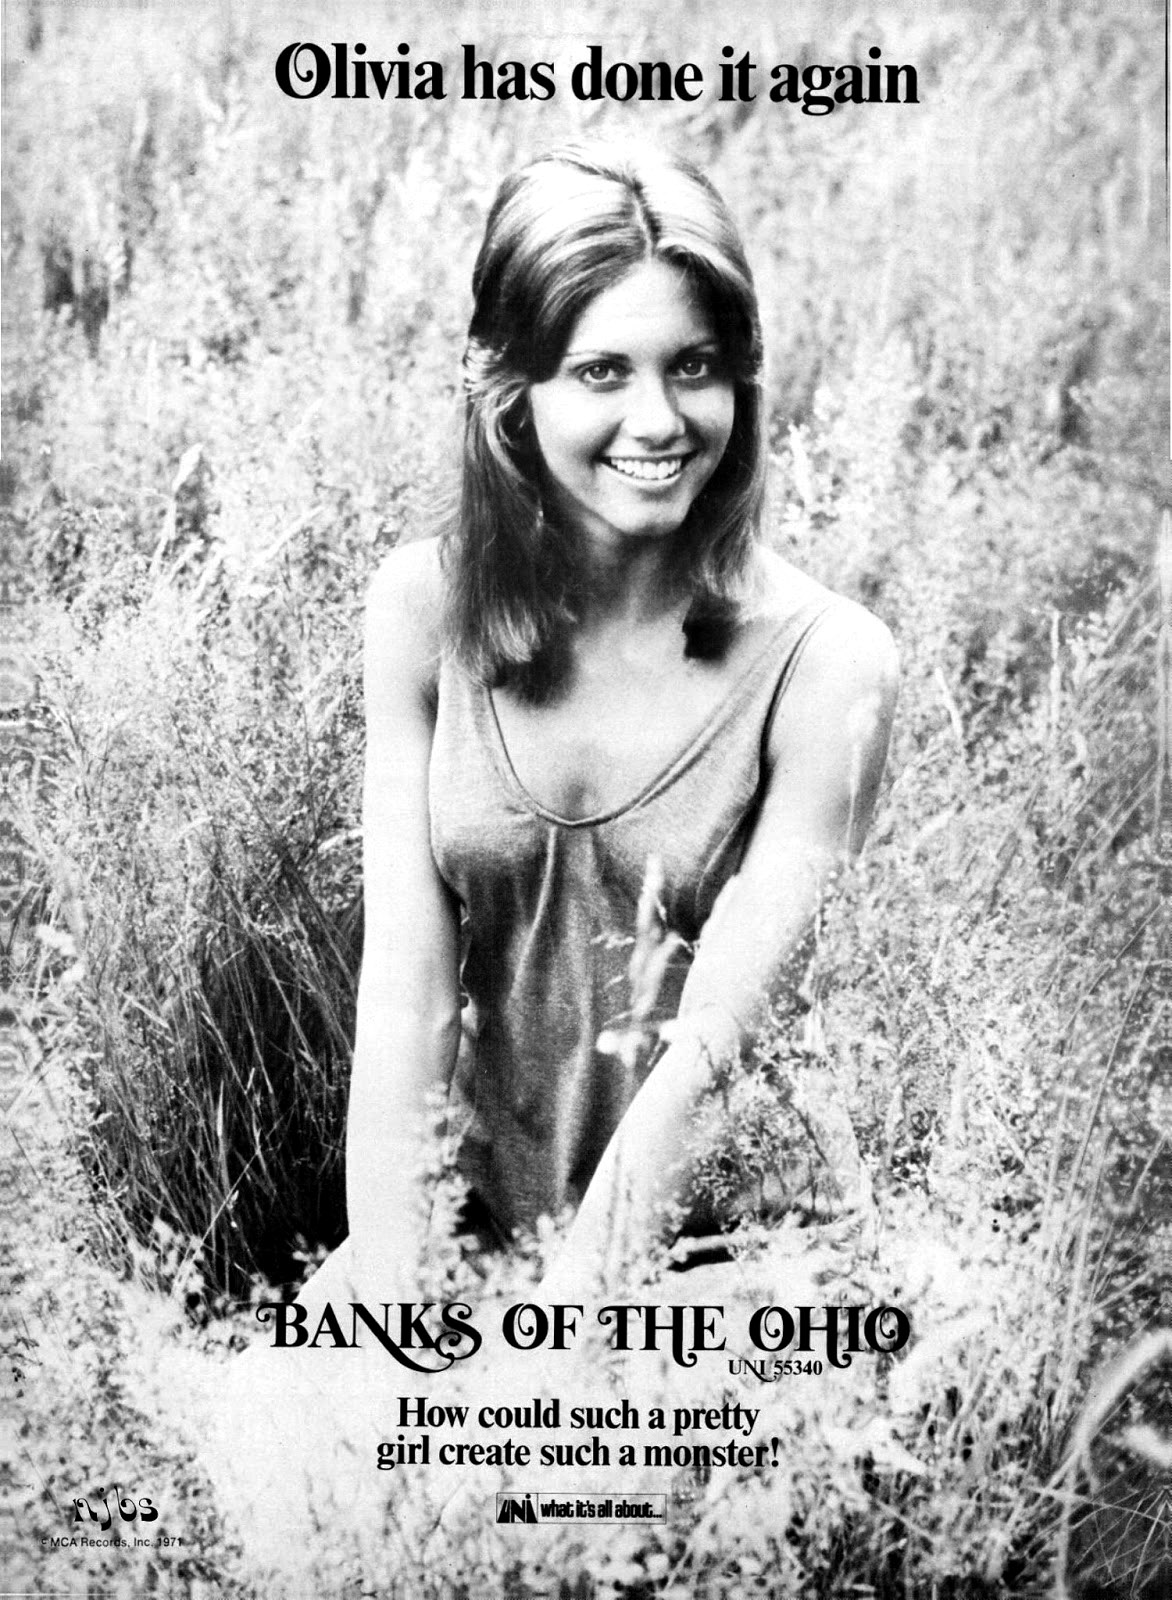 Olivia has done it again (ad for Banks of the Ohio single) - Billboard